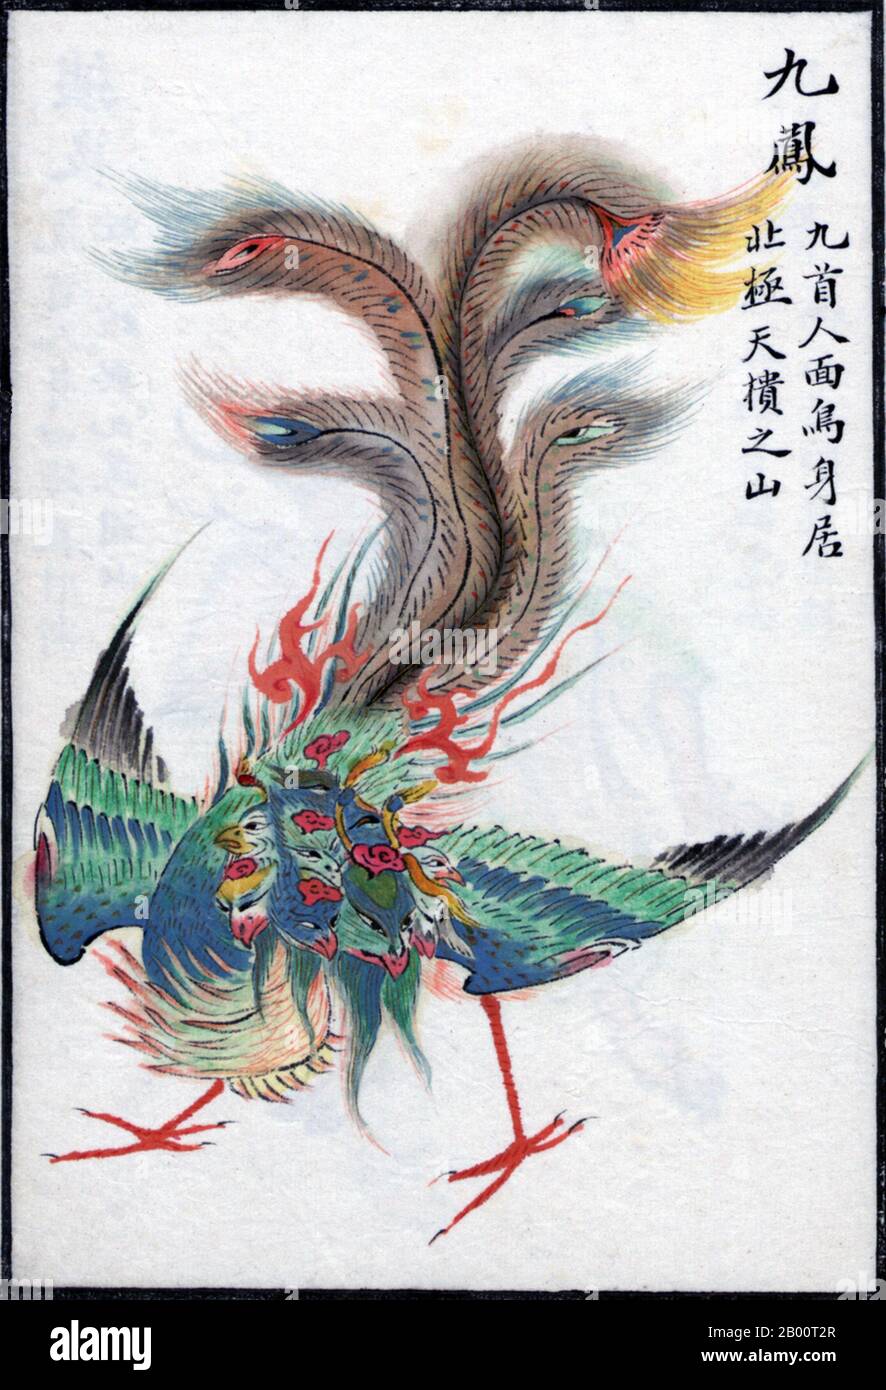 China: Jiufeng, the nine-headed phoenix.  This Qing-dynasty (1644-1911) print shows the nine-headed phoenix, a being from Chinese mythology with a bird's body and nine heads with human faces. It is one of several hybrid creatures mentioned in the Classic of Mountains and Seas (Shanhai jing), where it is said to dwell in the Great Wilds to the North at the mountain called Celestial-Coffer-at-the-Northern-Extremity. This entry is in what may be the most recent section of this work, which may have been composed at any time between the third-fourth century BCE and the third-fourth century CE Stock Photo